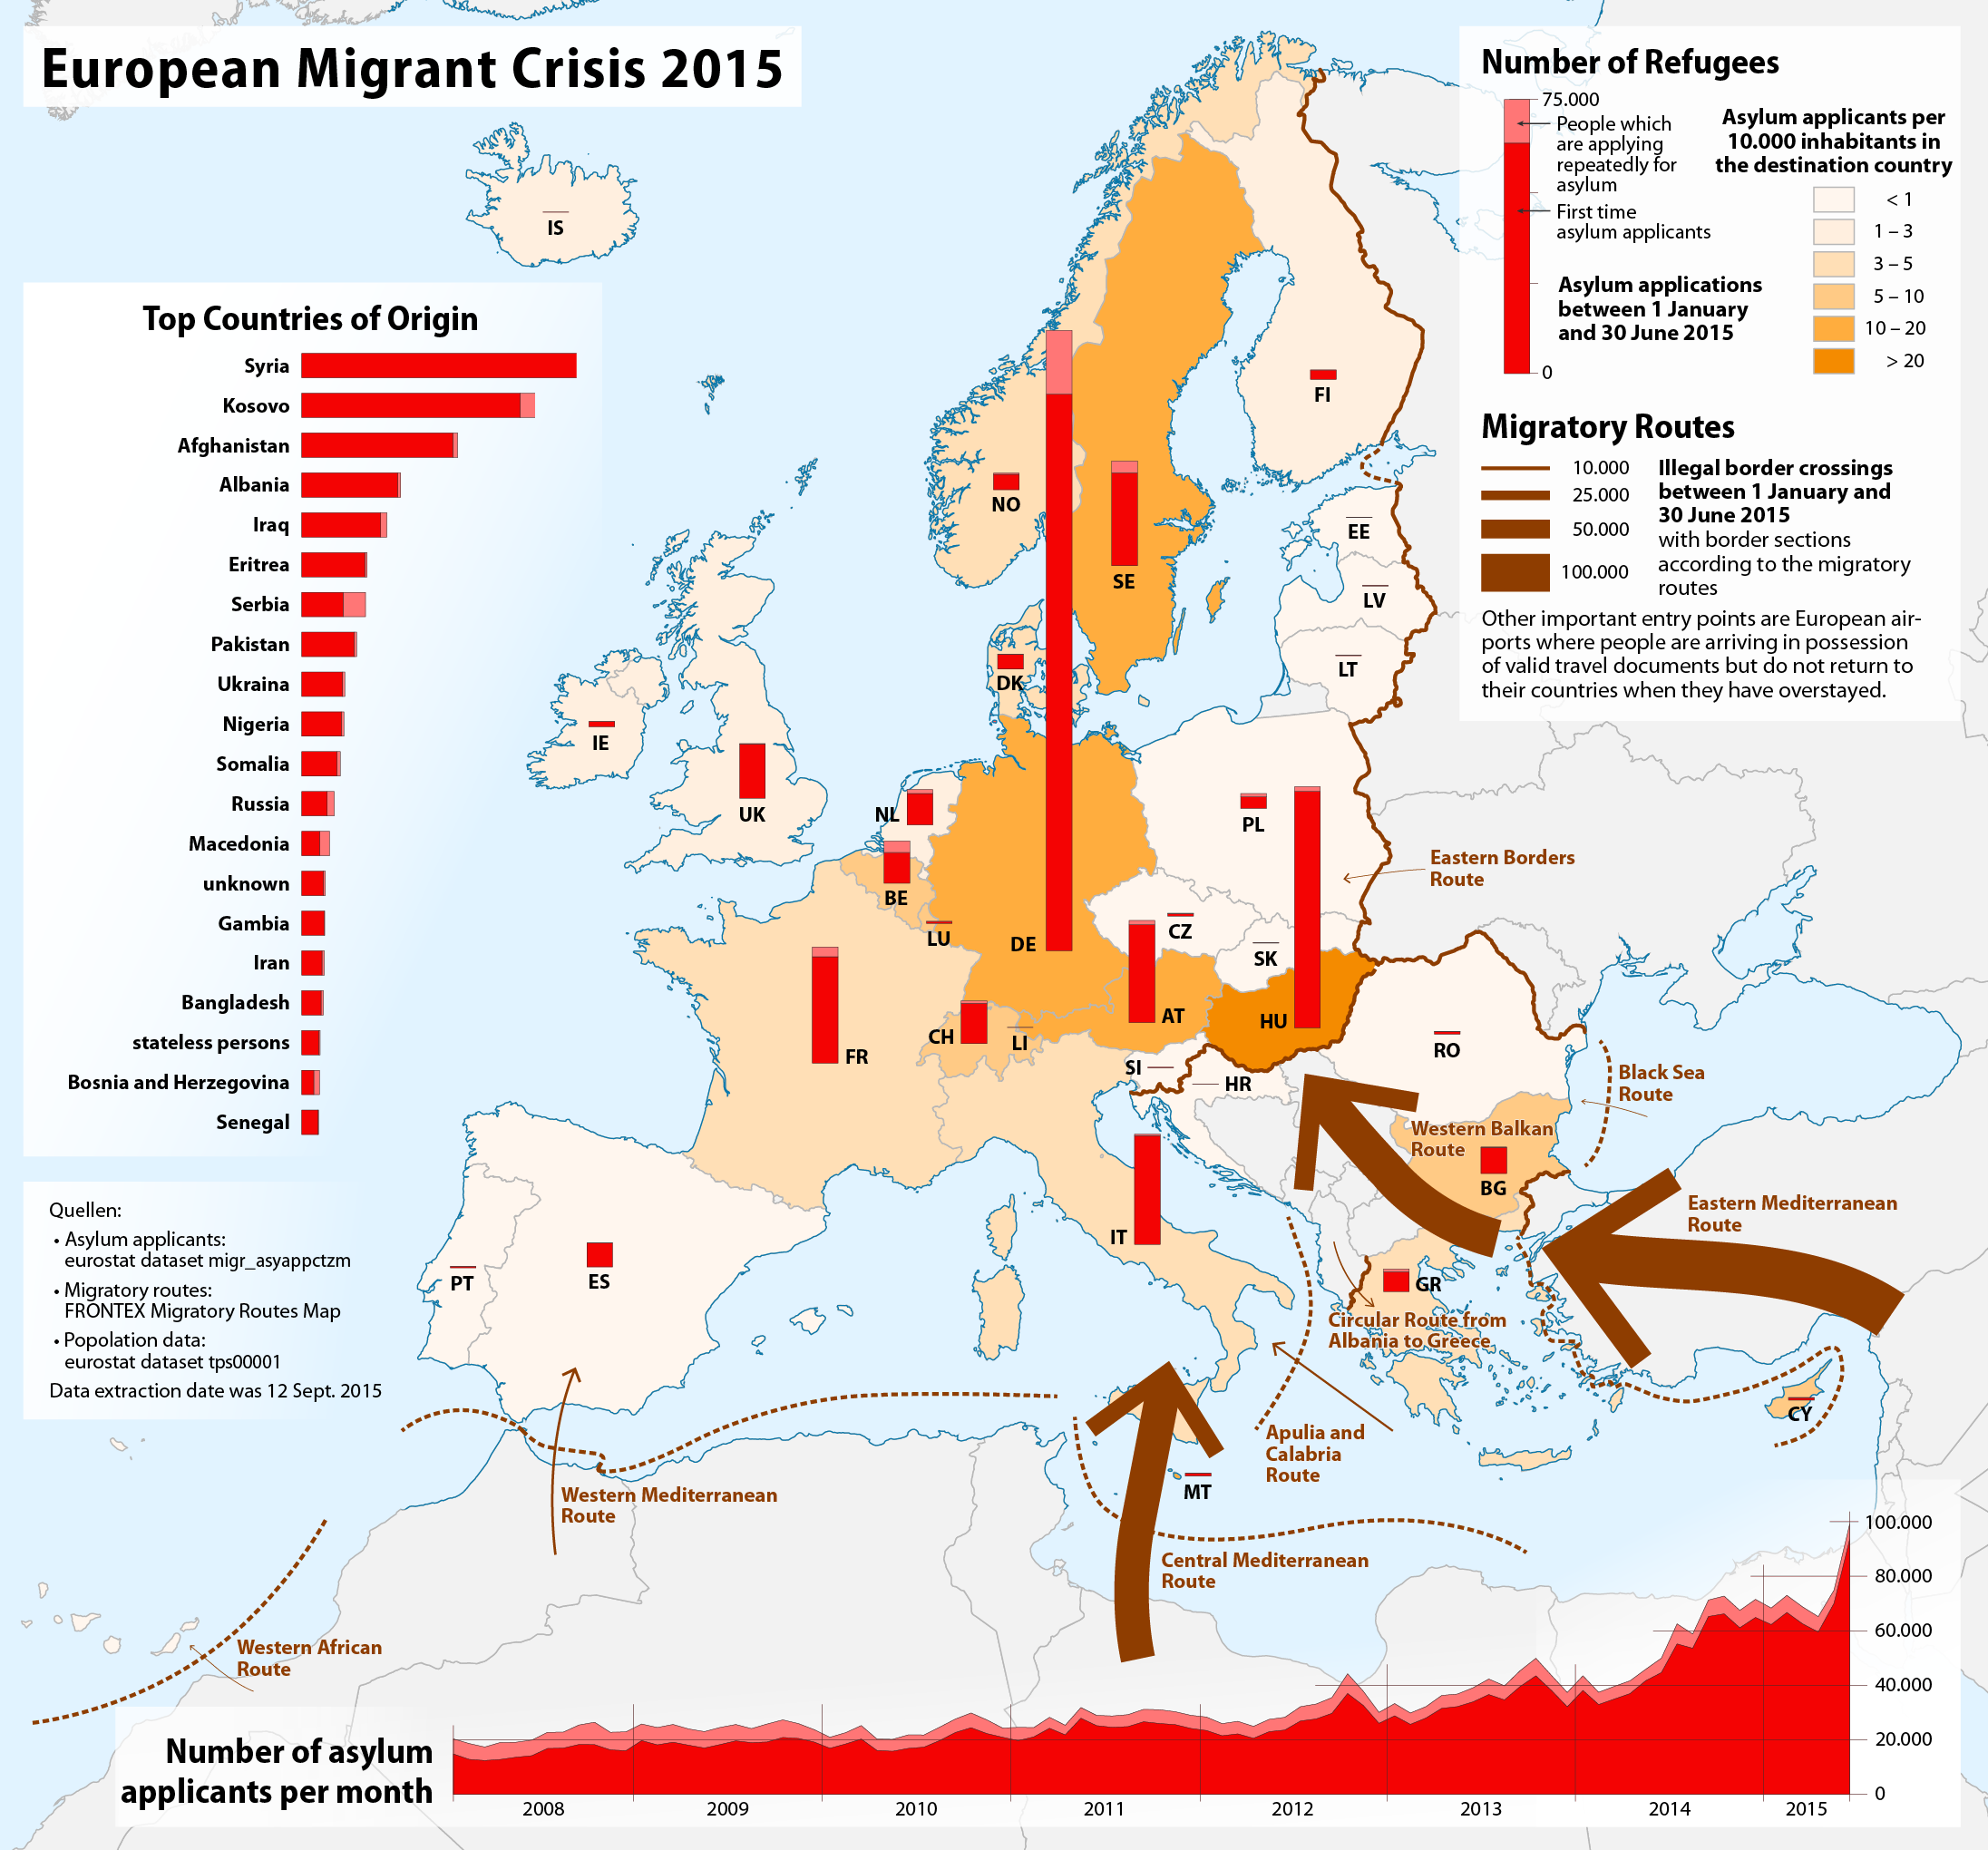 map_of_the_european_migrant_crisis_2015.png